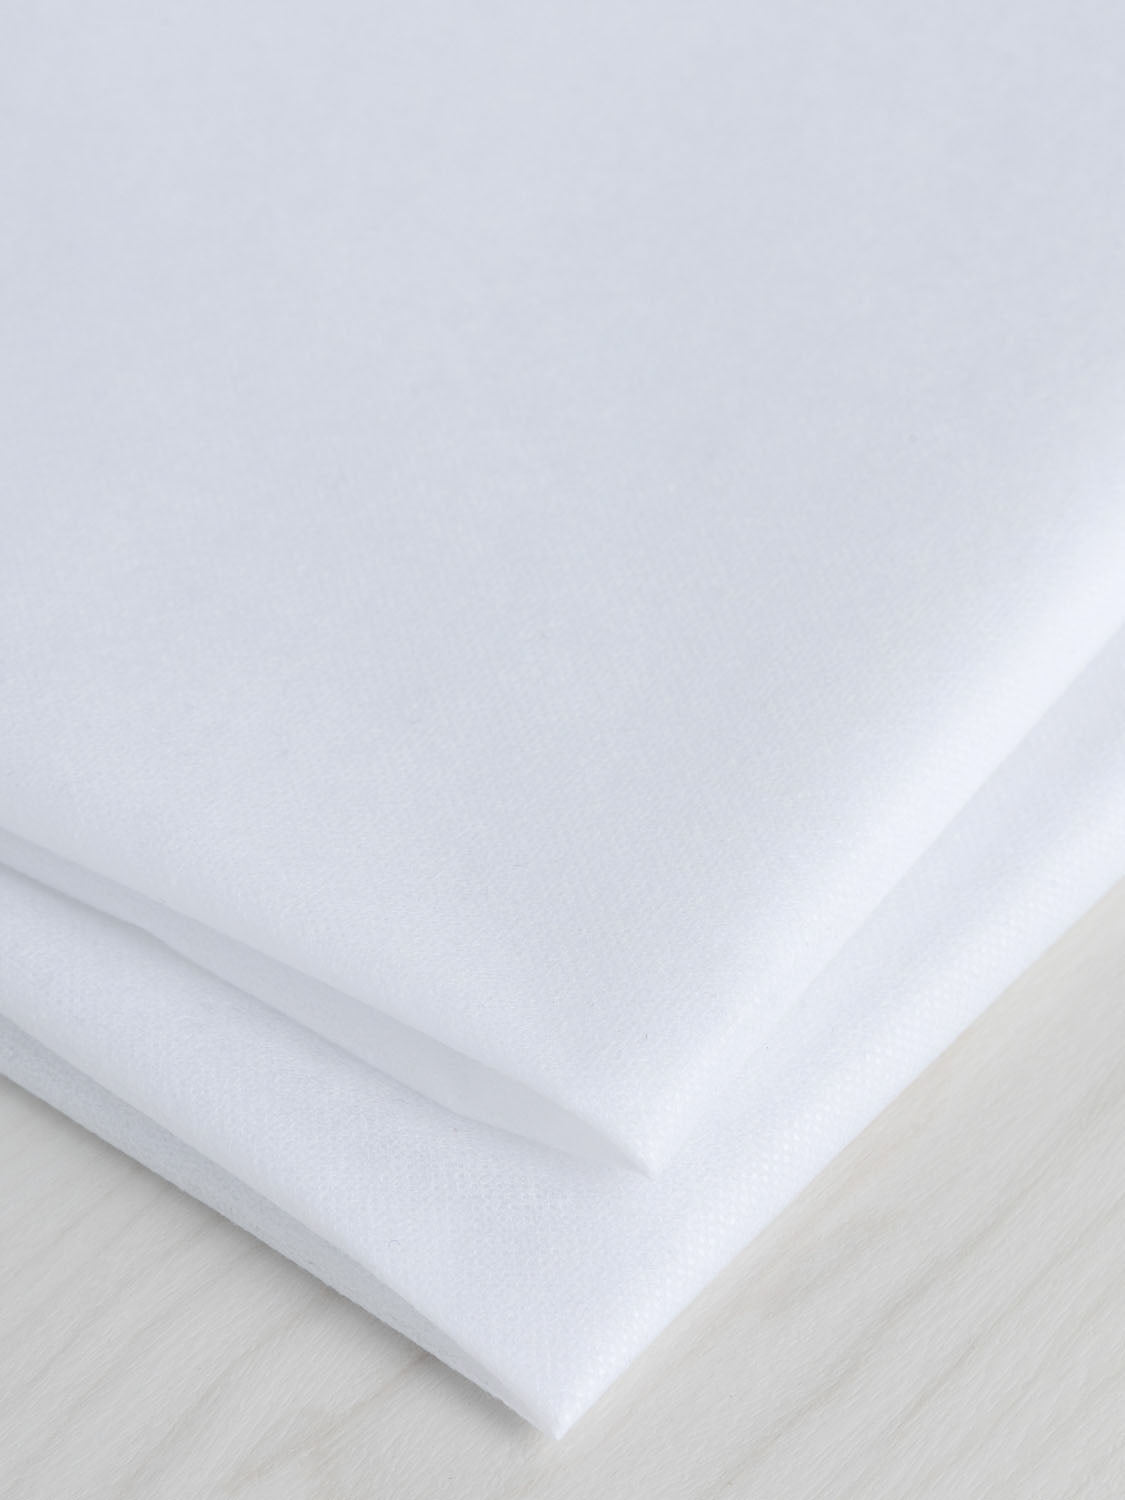 Recycled Lightweight Non-Woven Interfacing - White | Core Fabrics